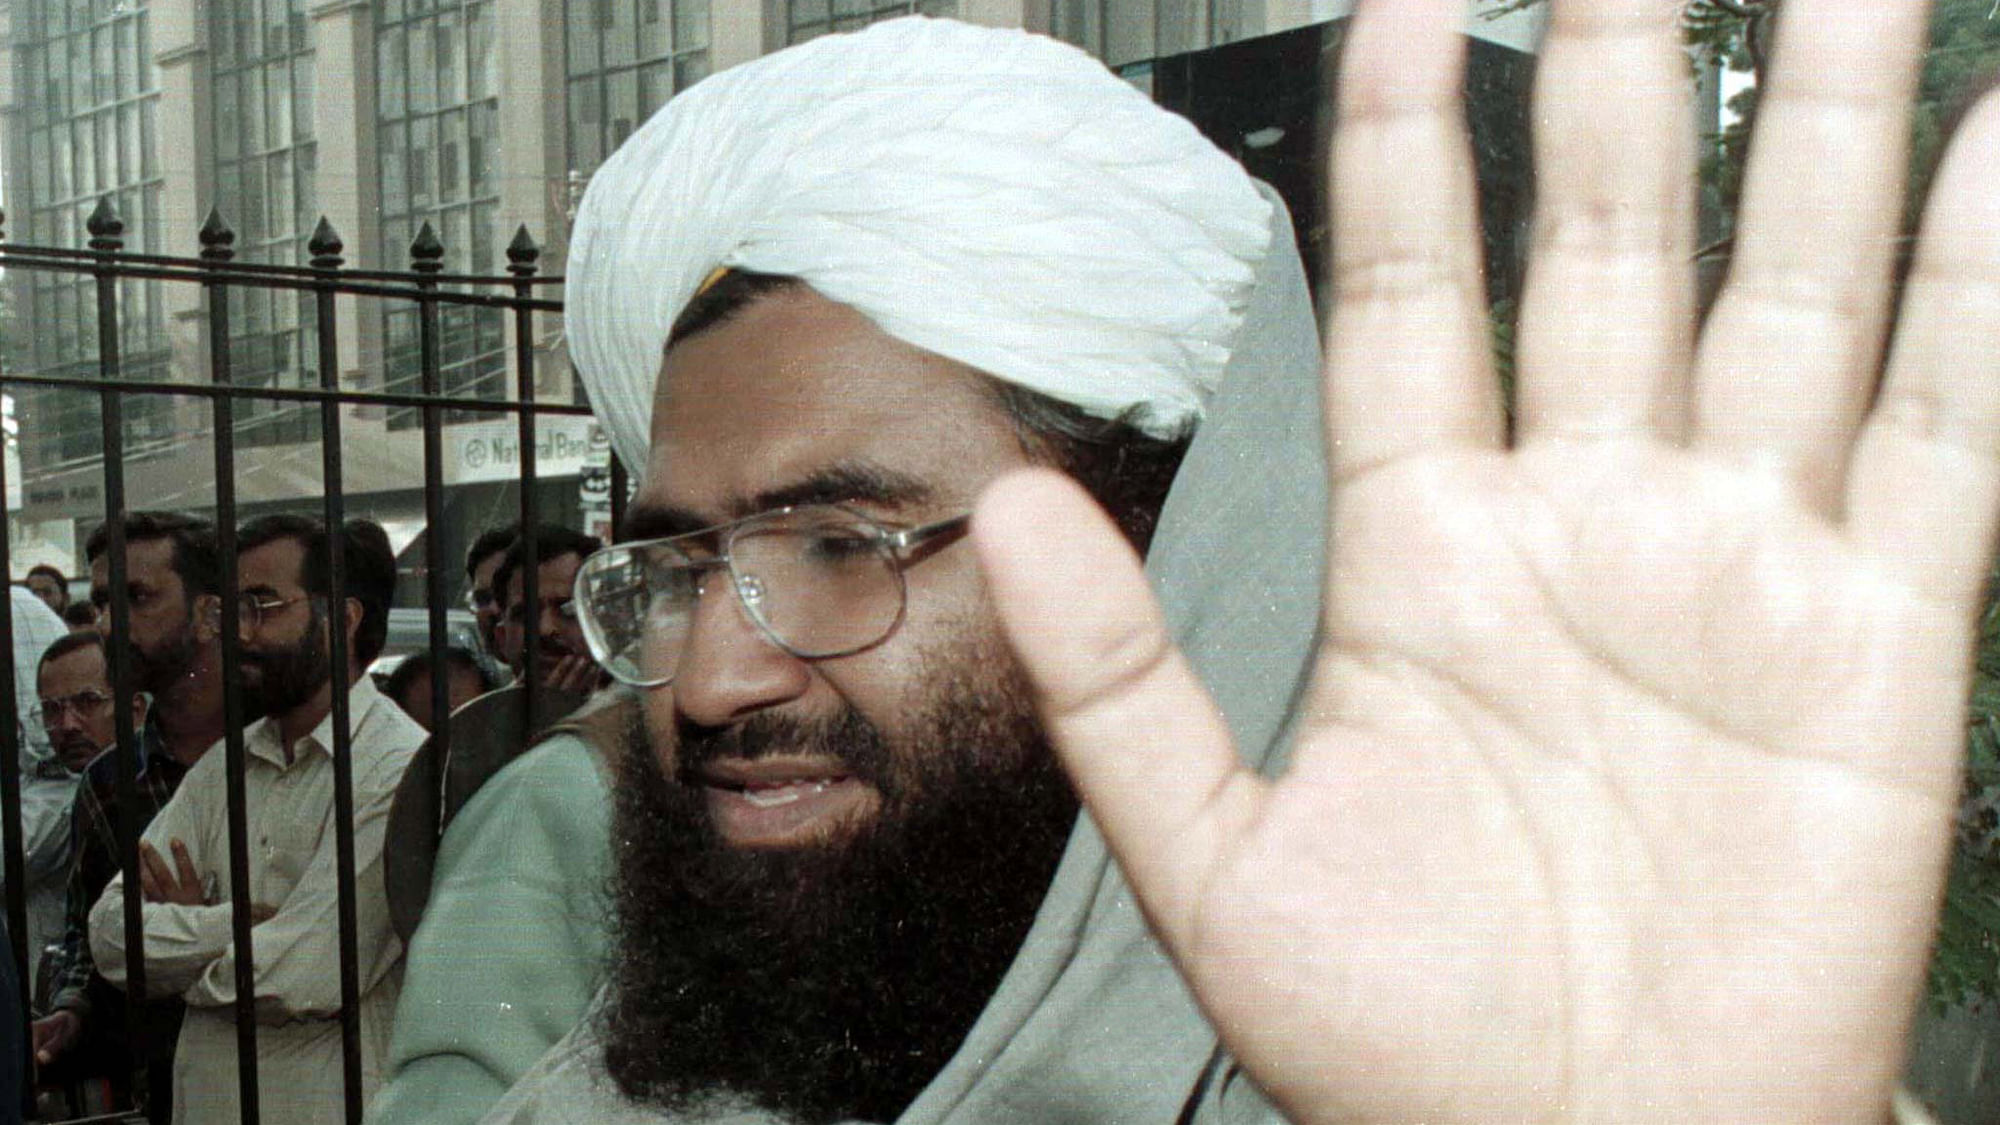 File photo of Maulana Masood Azhar, current JeM chief, soon after his release by the Indian government. (Photo: Reuters)